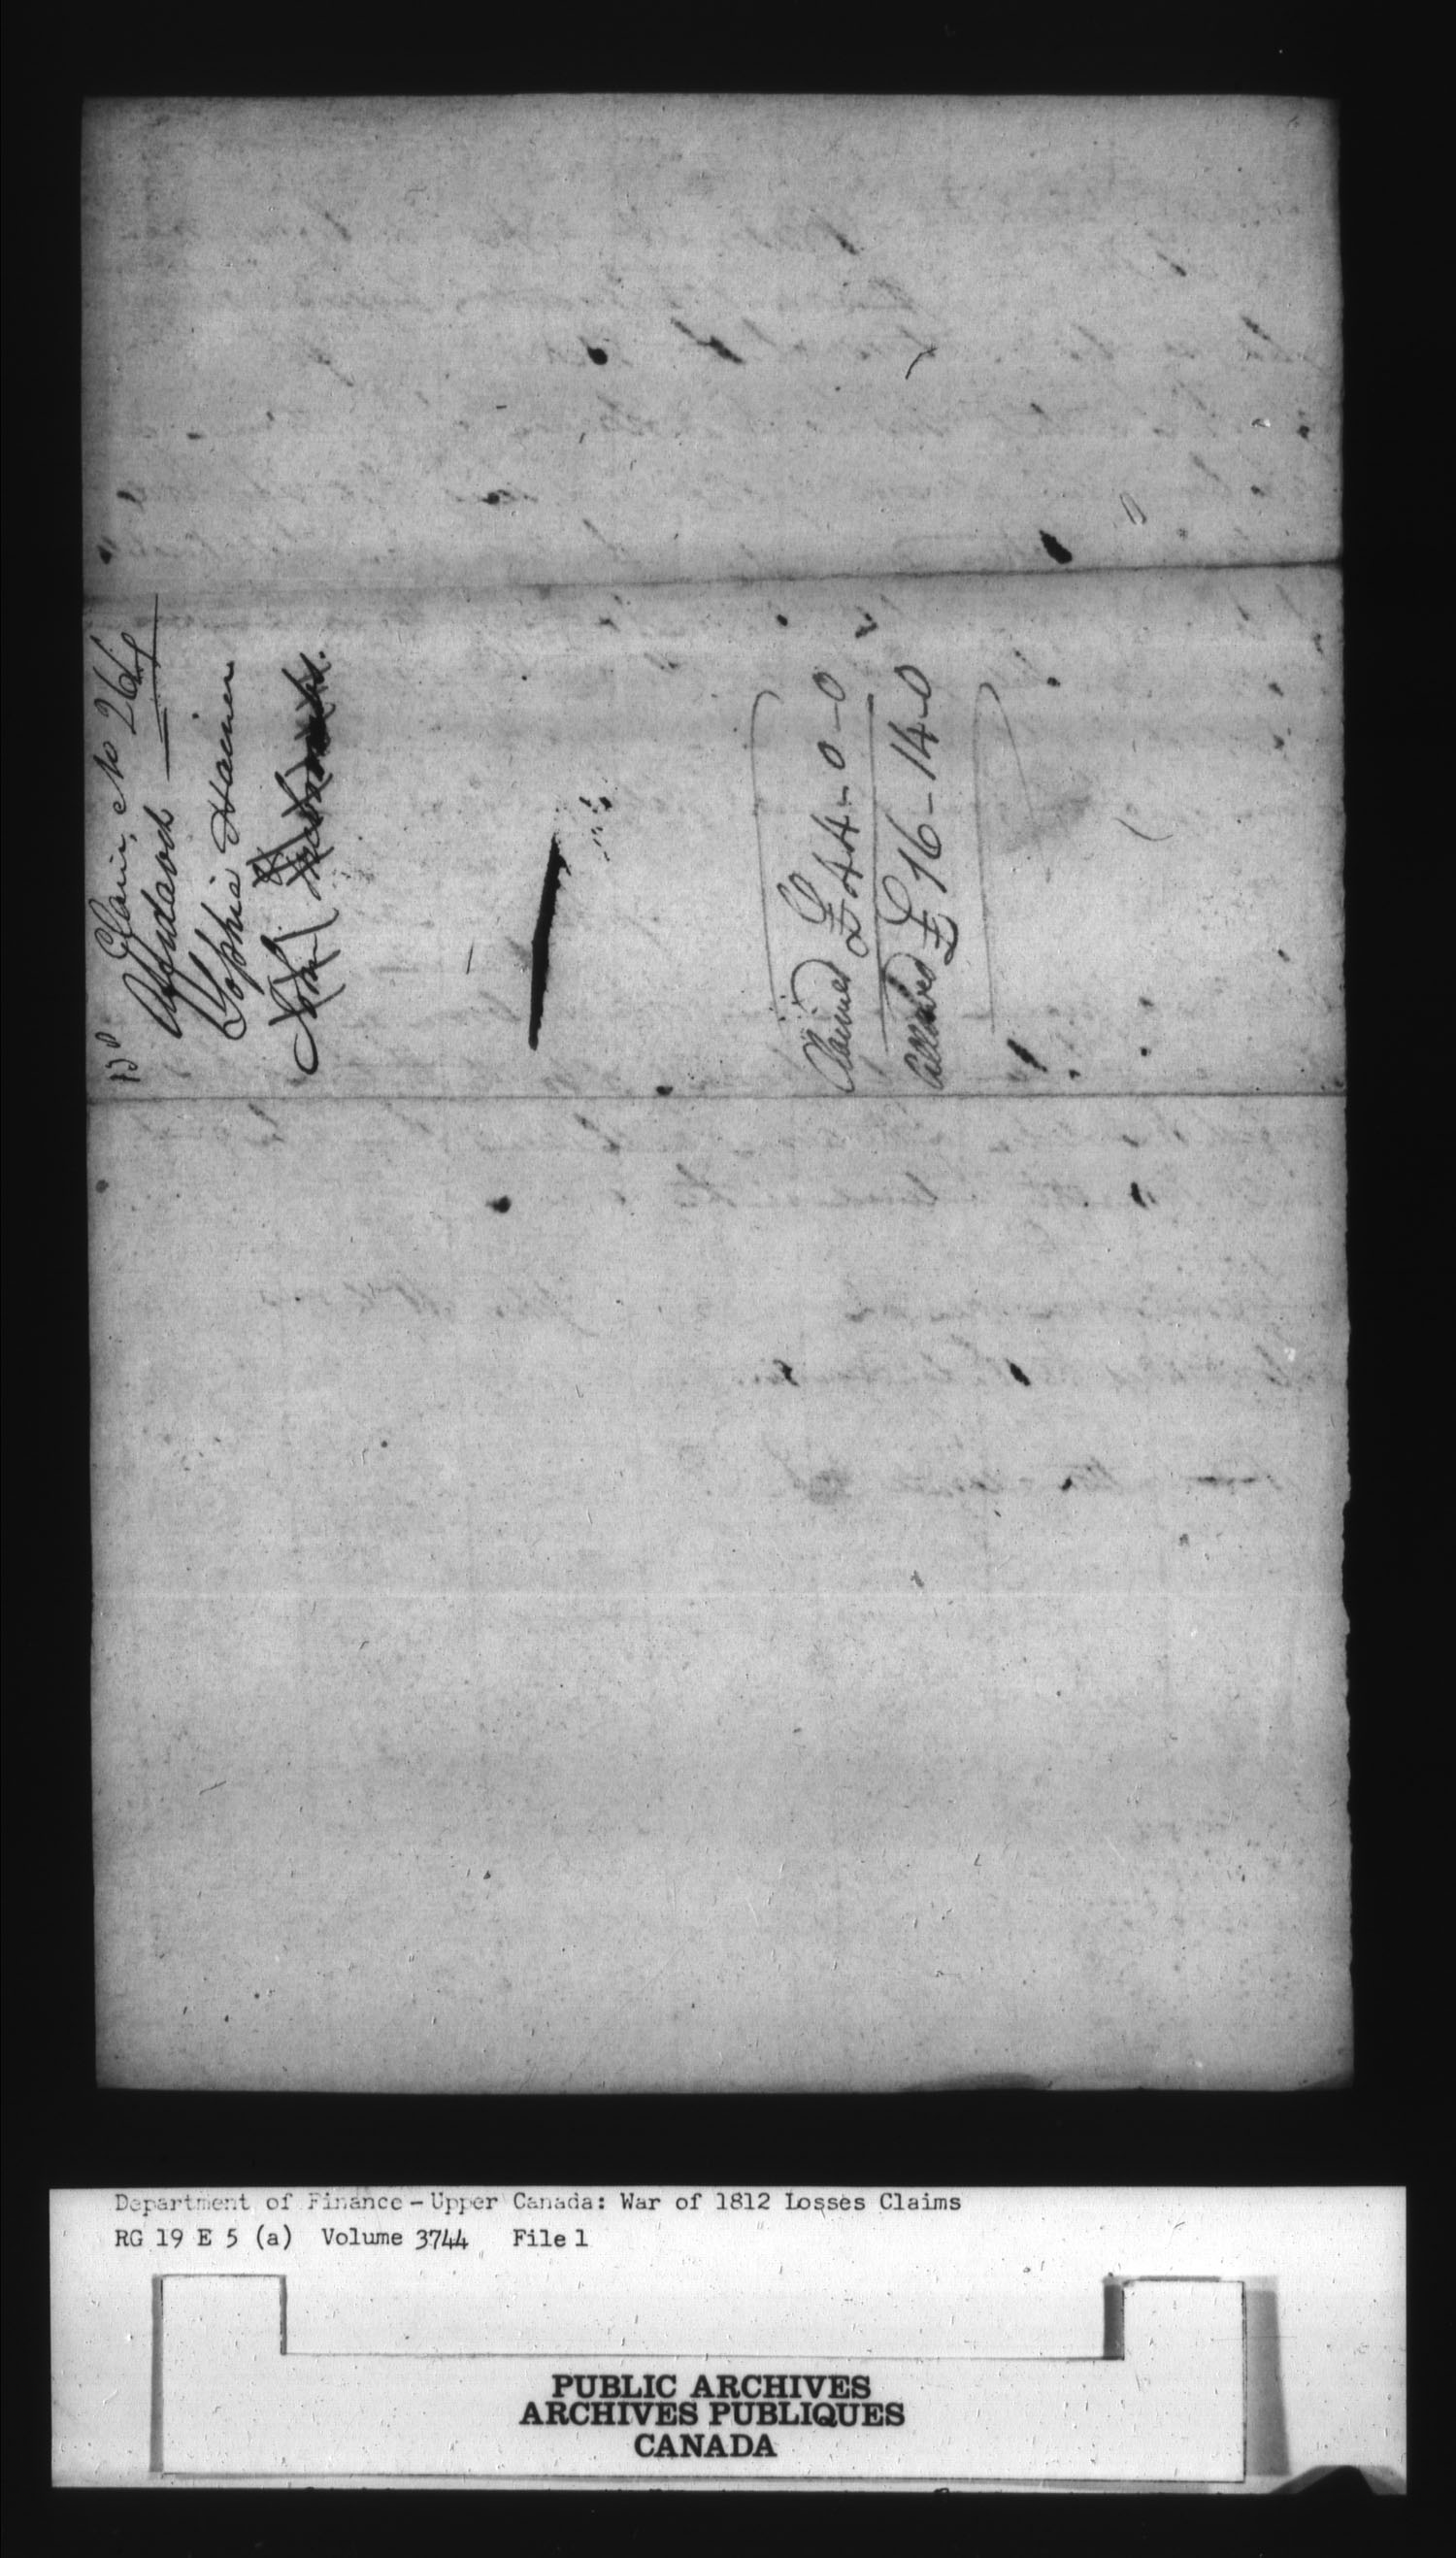 Title: War of 1812: Board of Claims for Losses, 1813-1848, RG 19 E5A - Mikan Number: 139215 - Microform: t-1128